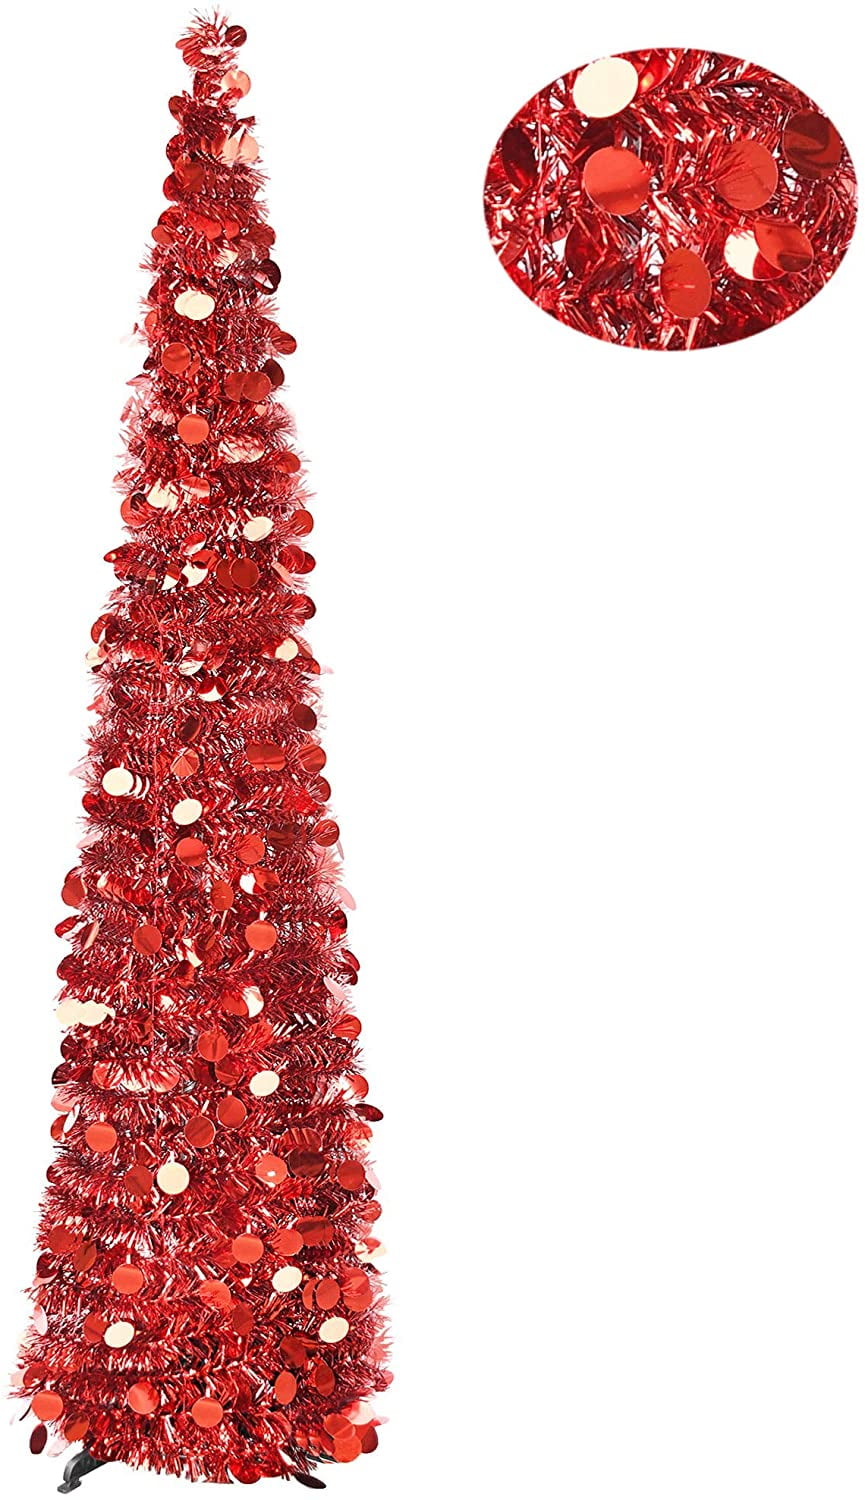 Artificial Collapsible Pop up Christmas Tinsel Tree with Stand Xmas Decor